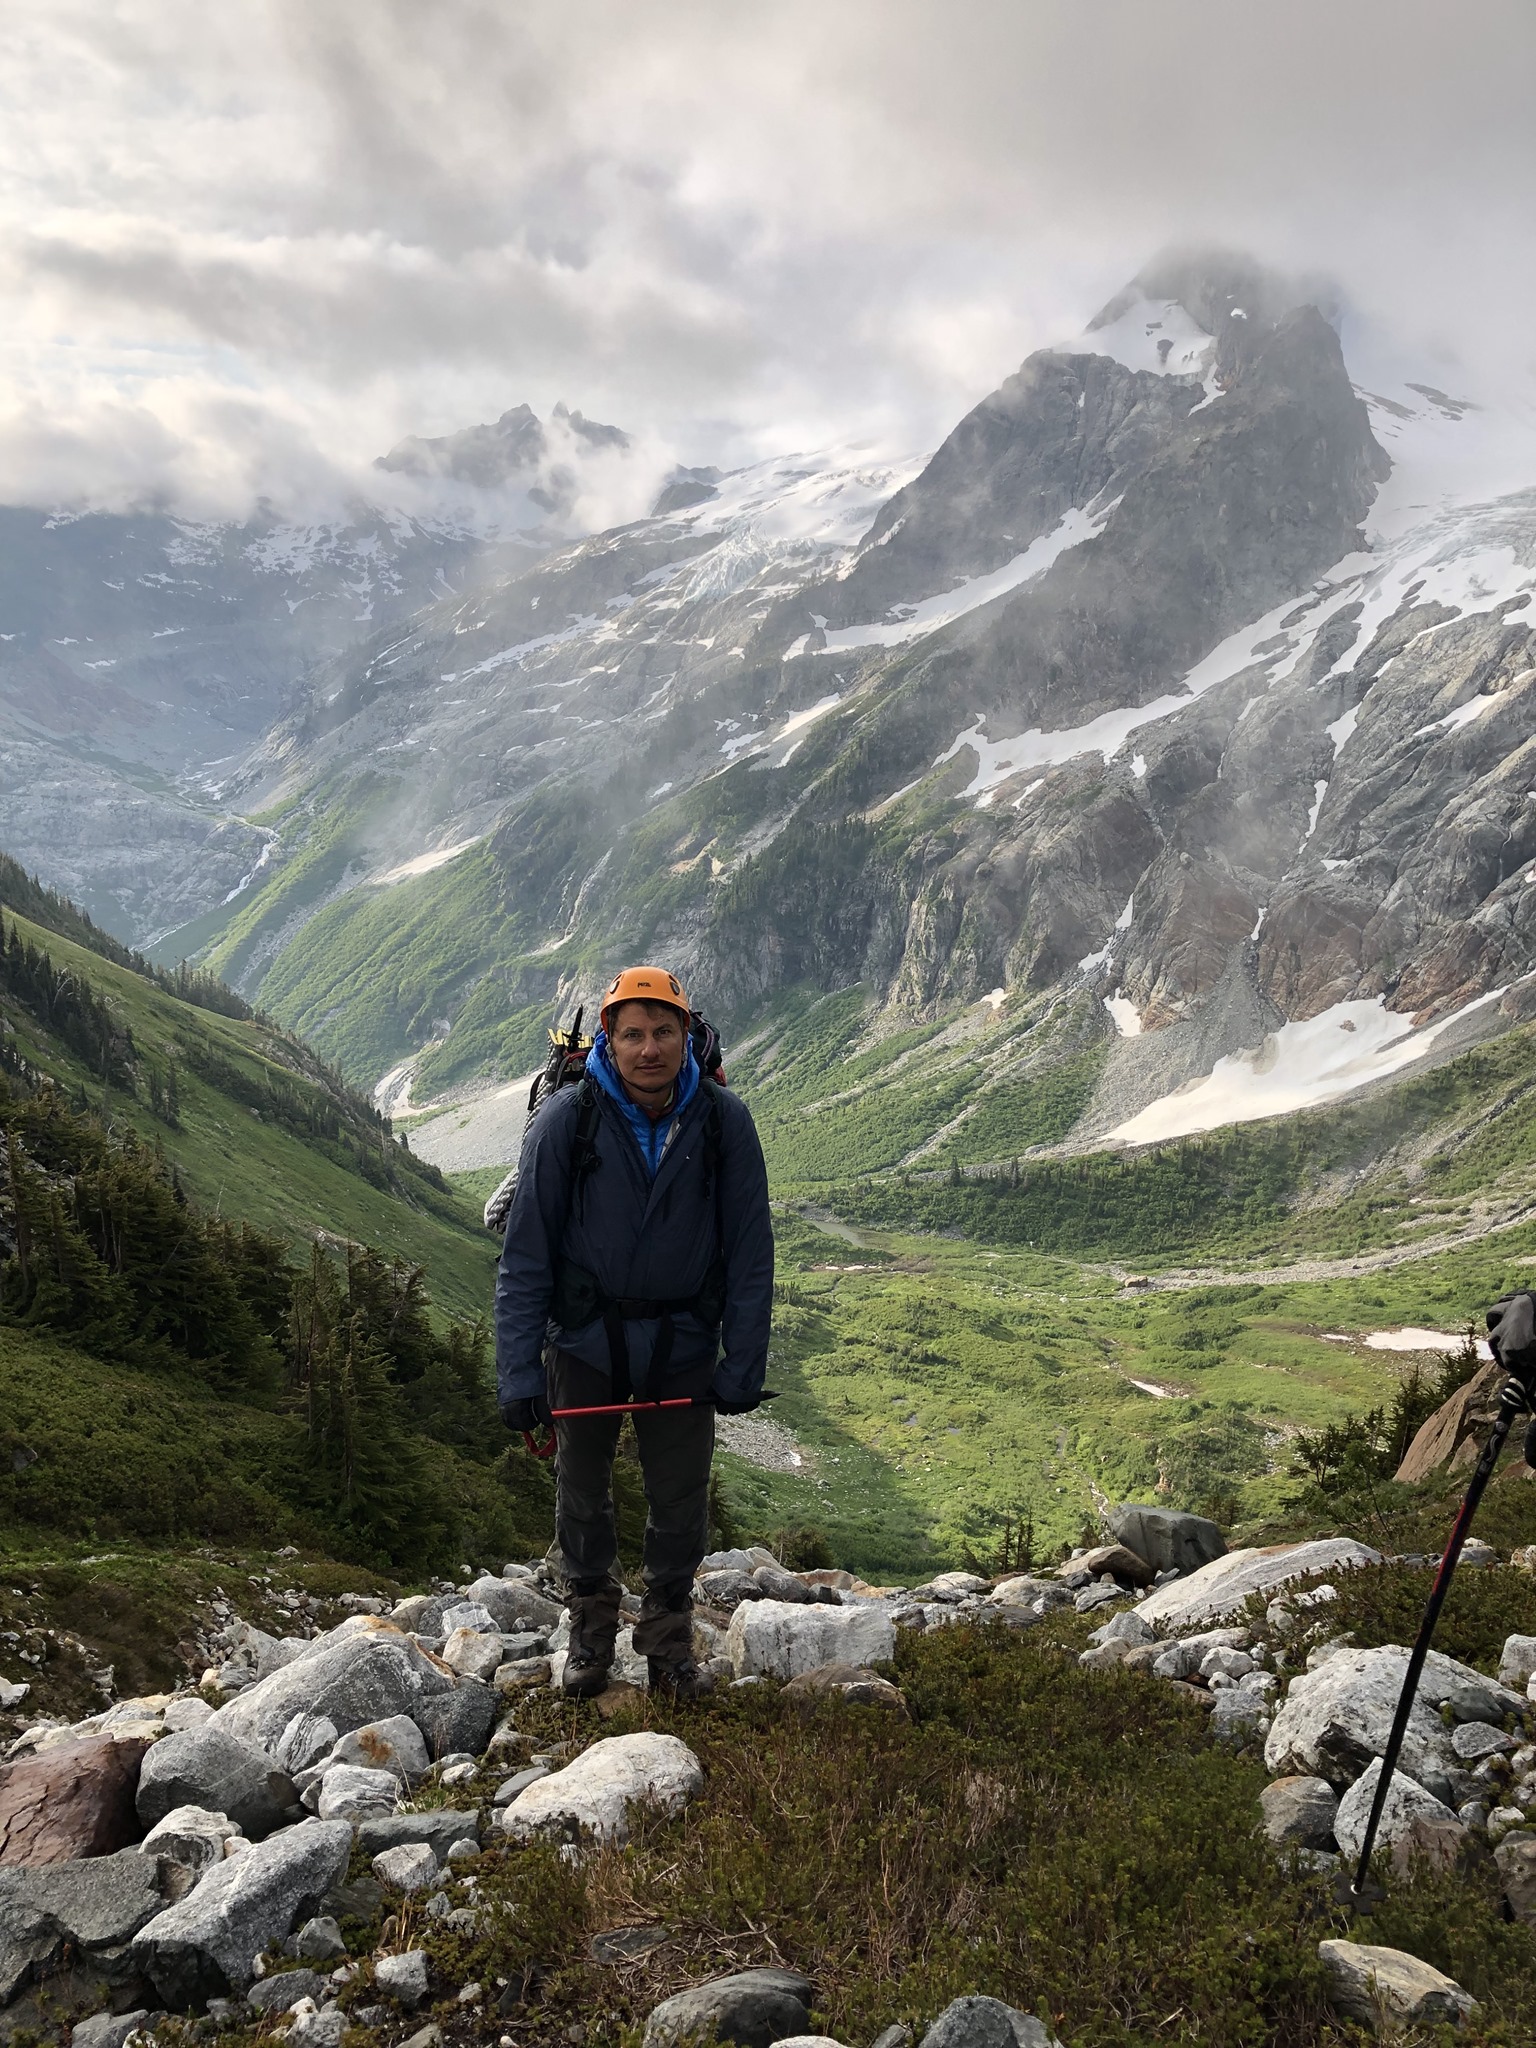 Doctor Paskalev hiking in the mountains